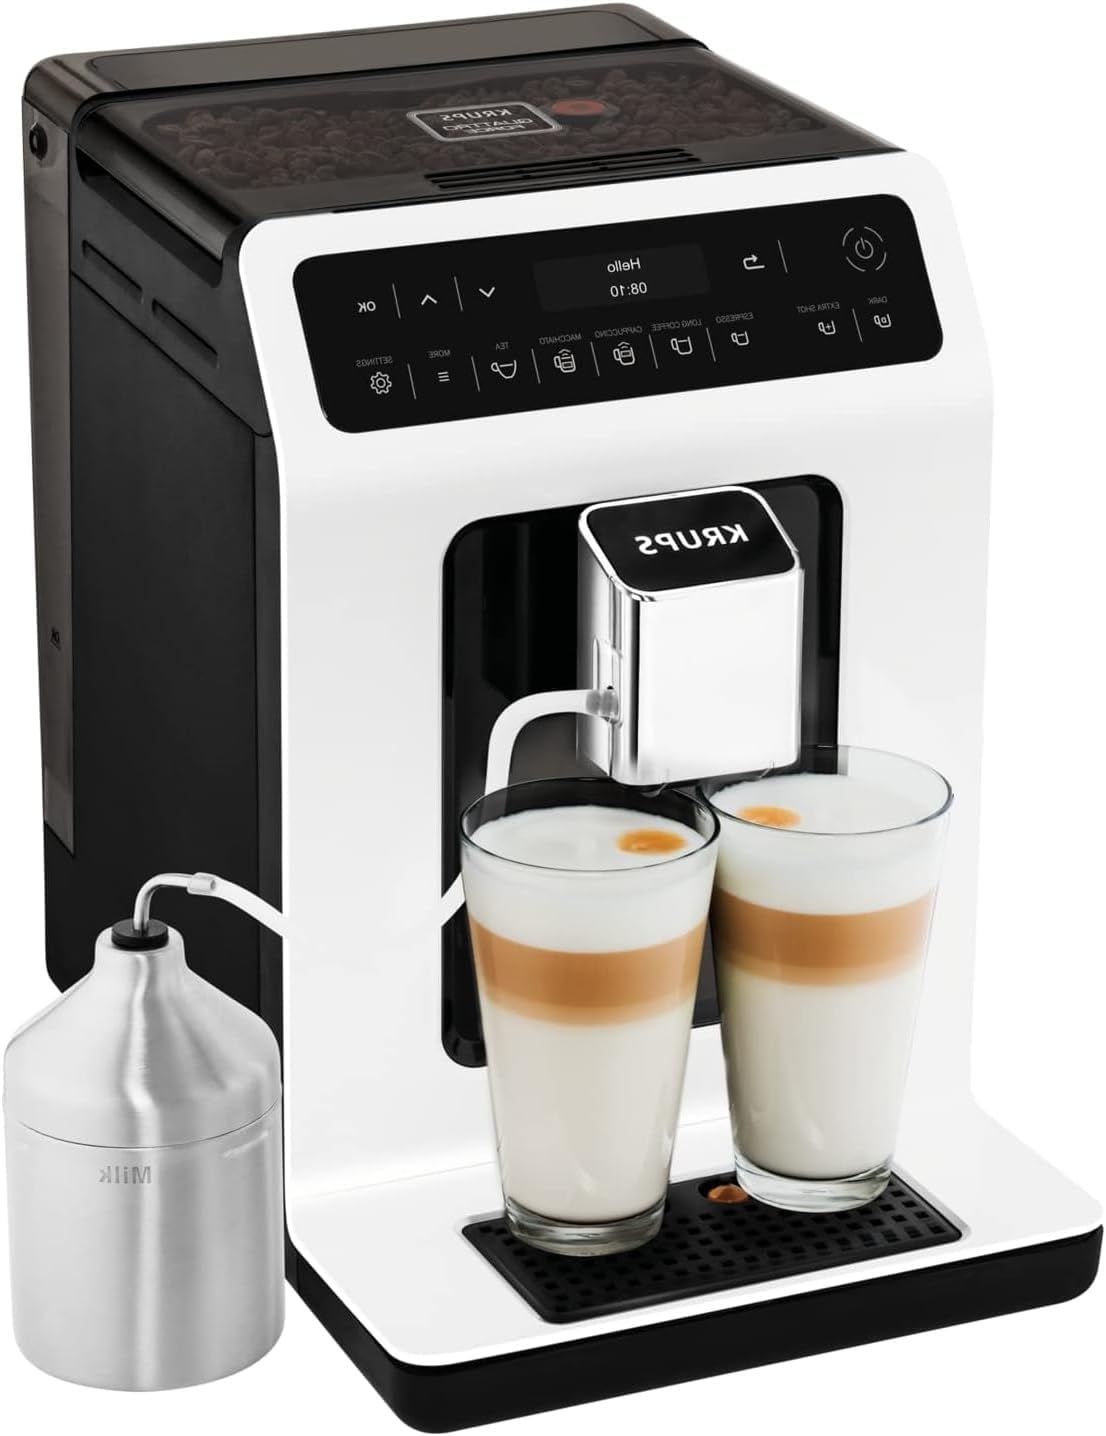 Krups Evidence Fully Automatic Coffee Machine 15 Bar, 1450 W, Milk Foam System, Automatic Cleaning, 2 Cup Function, Stainless Steel, OLED Display, Direct Selection Buttons, Espresso Coffee Machine,